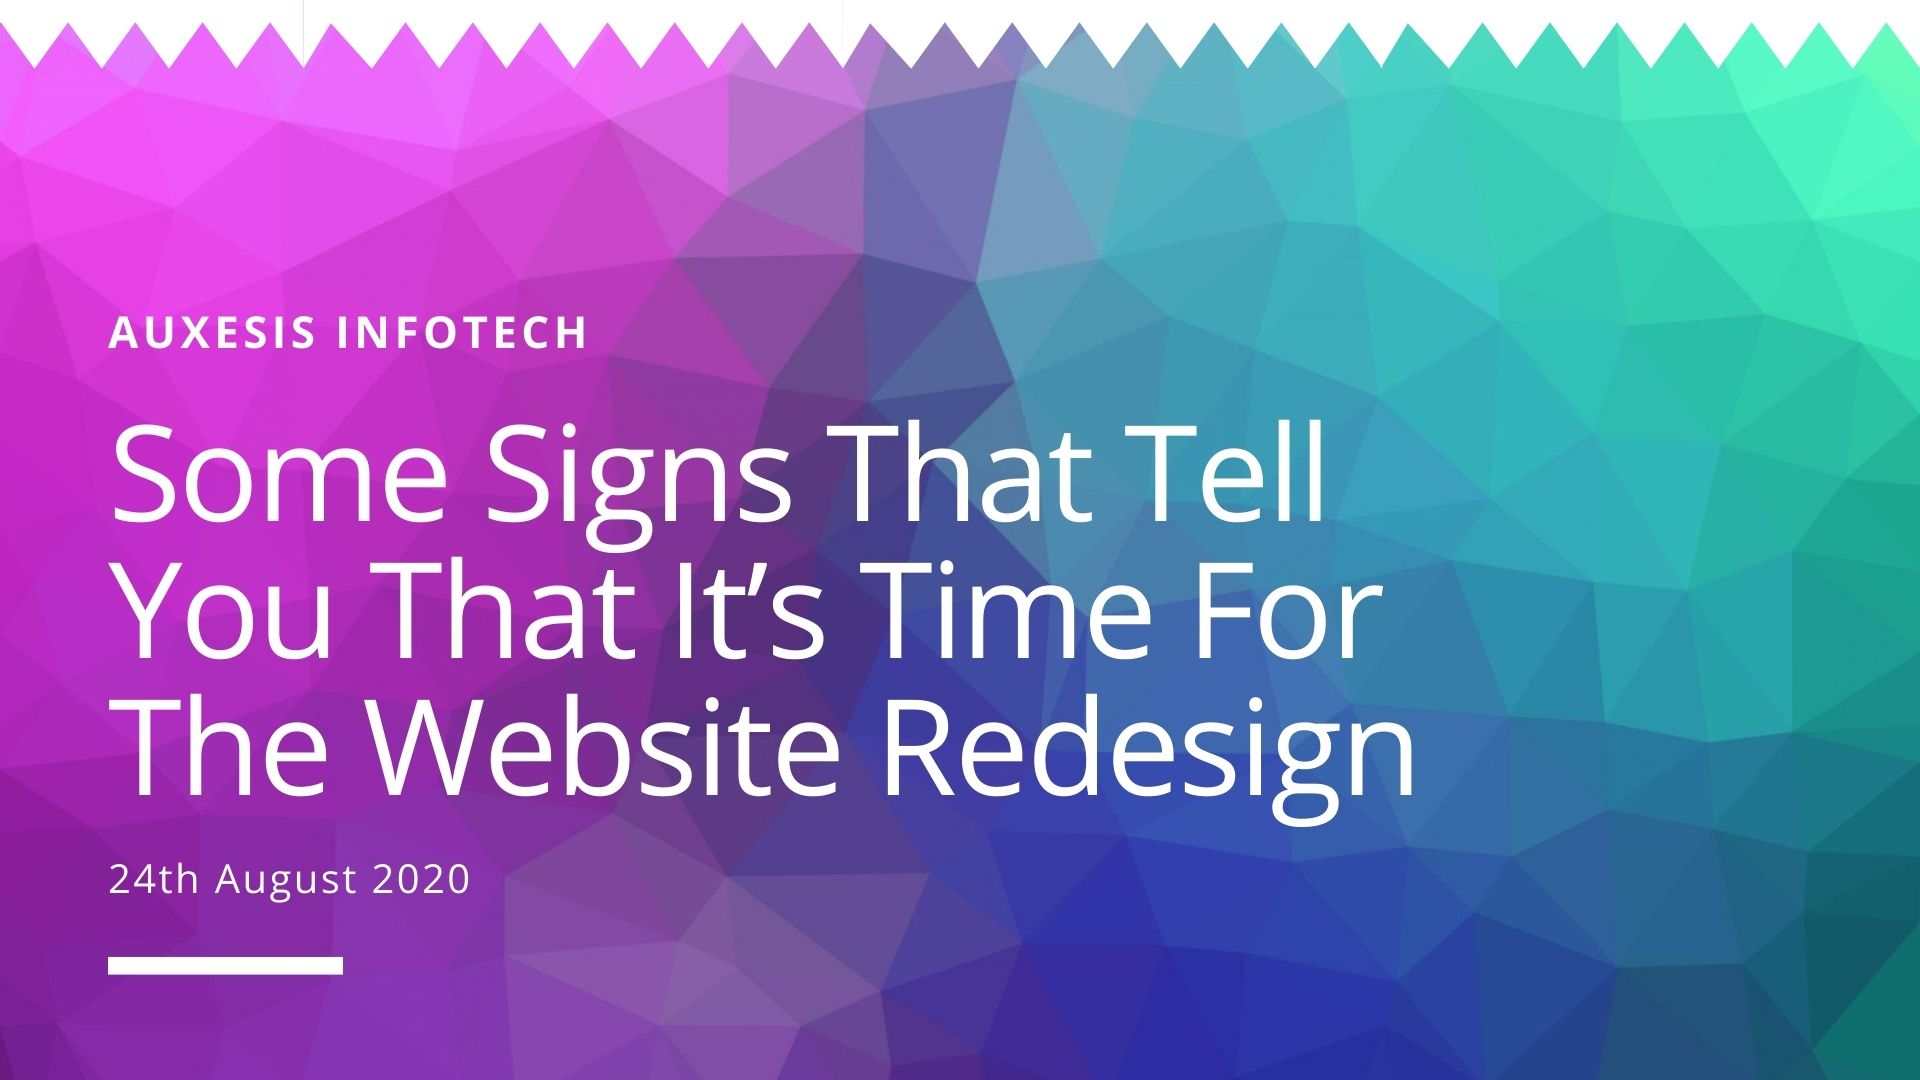 Some Signs That Tell You That It’s Time For The Website Redesign